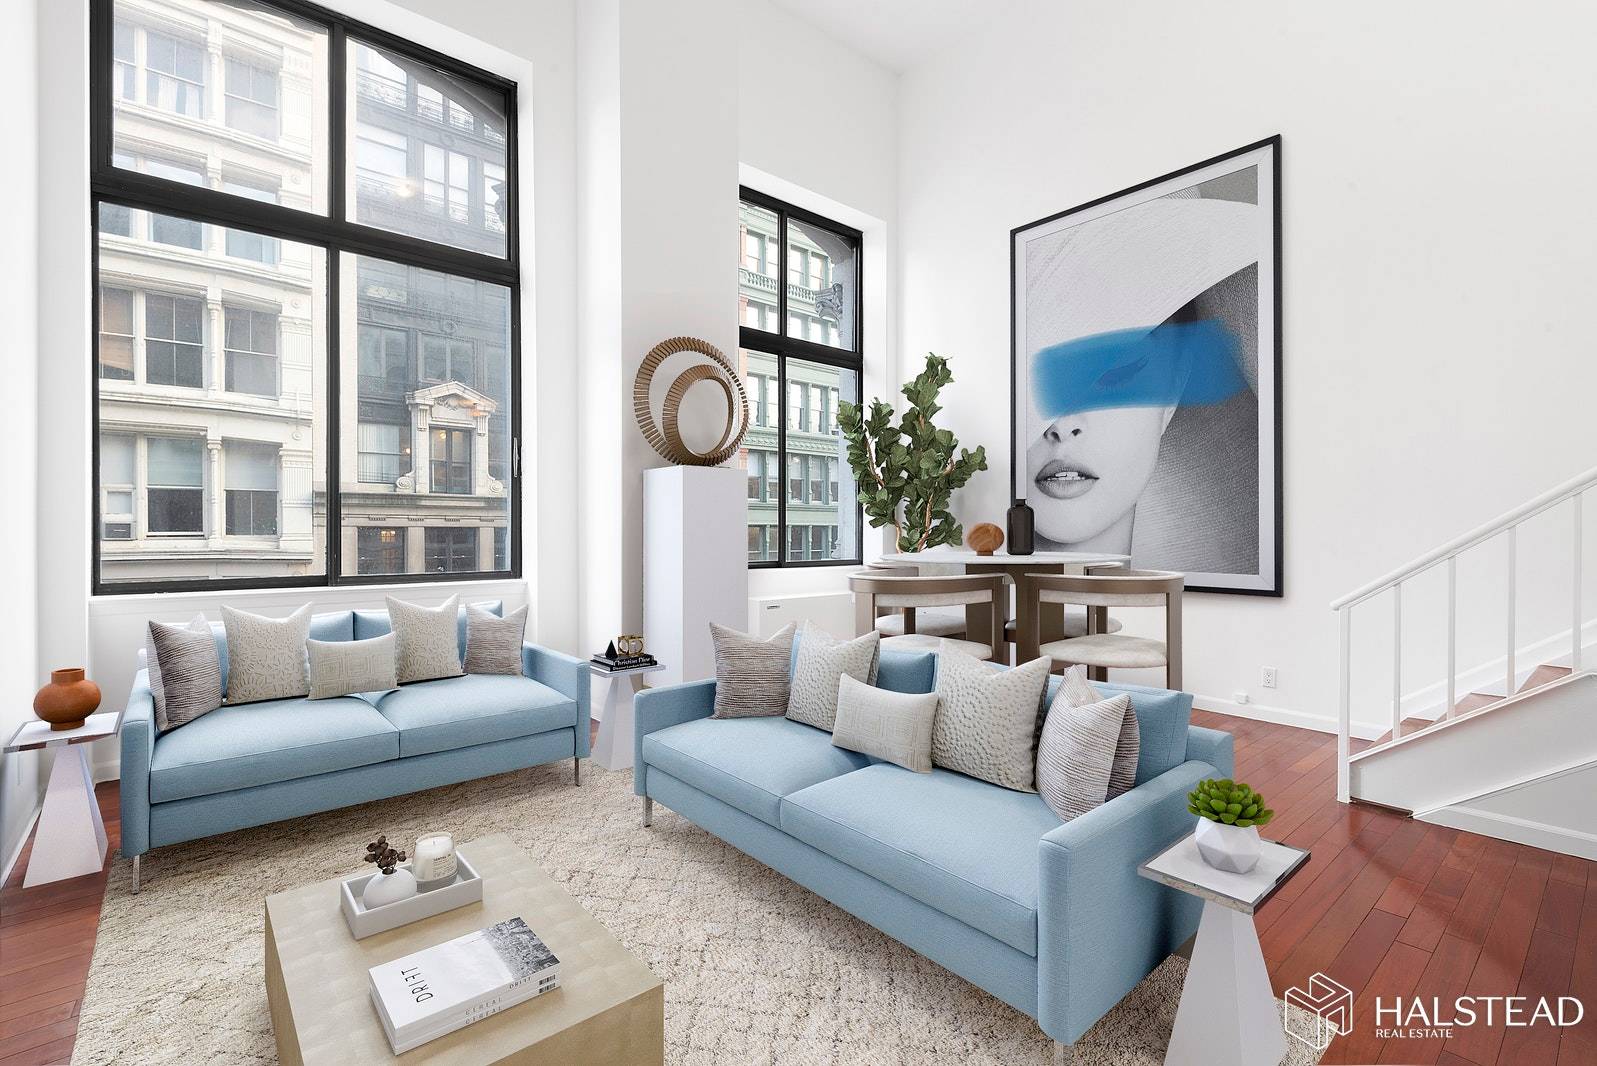 Set within a beautiful pre war building in the heart of NoHo, Apt 529 at 77 Bleecker is a gracious one bedroom duplex featuring soaring 17 foot ceilings and gorgeous ...